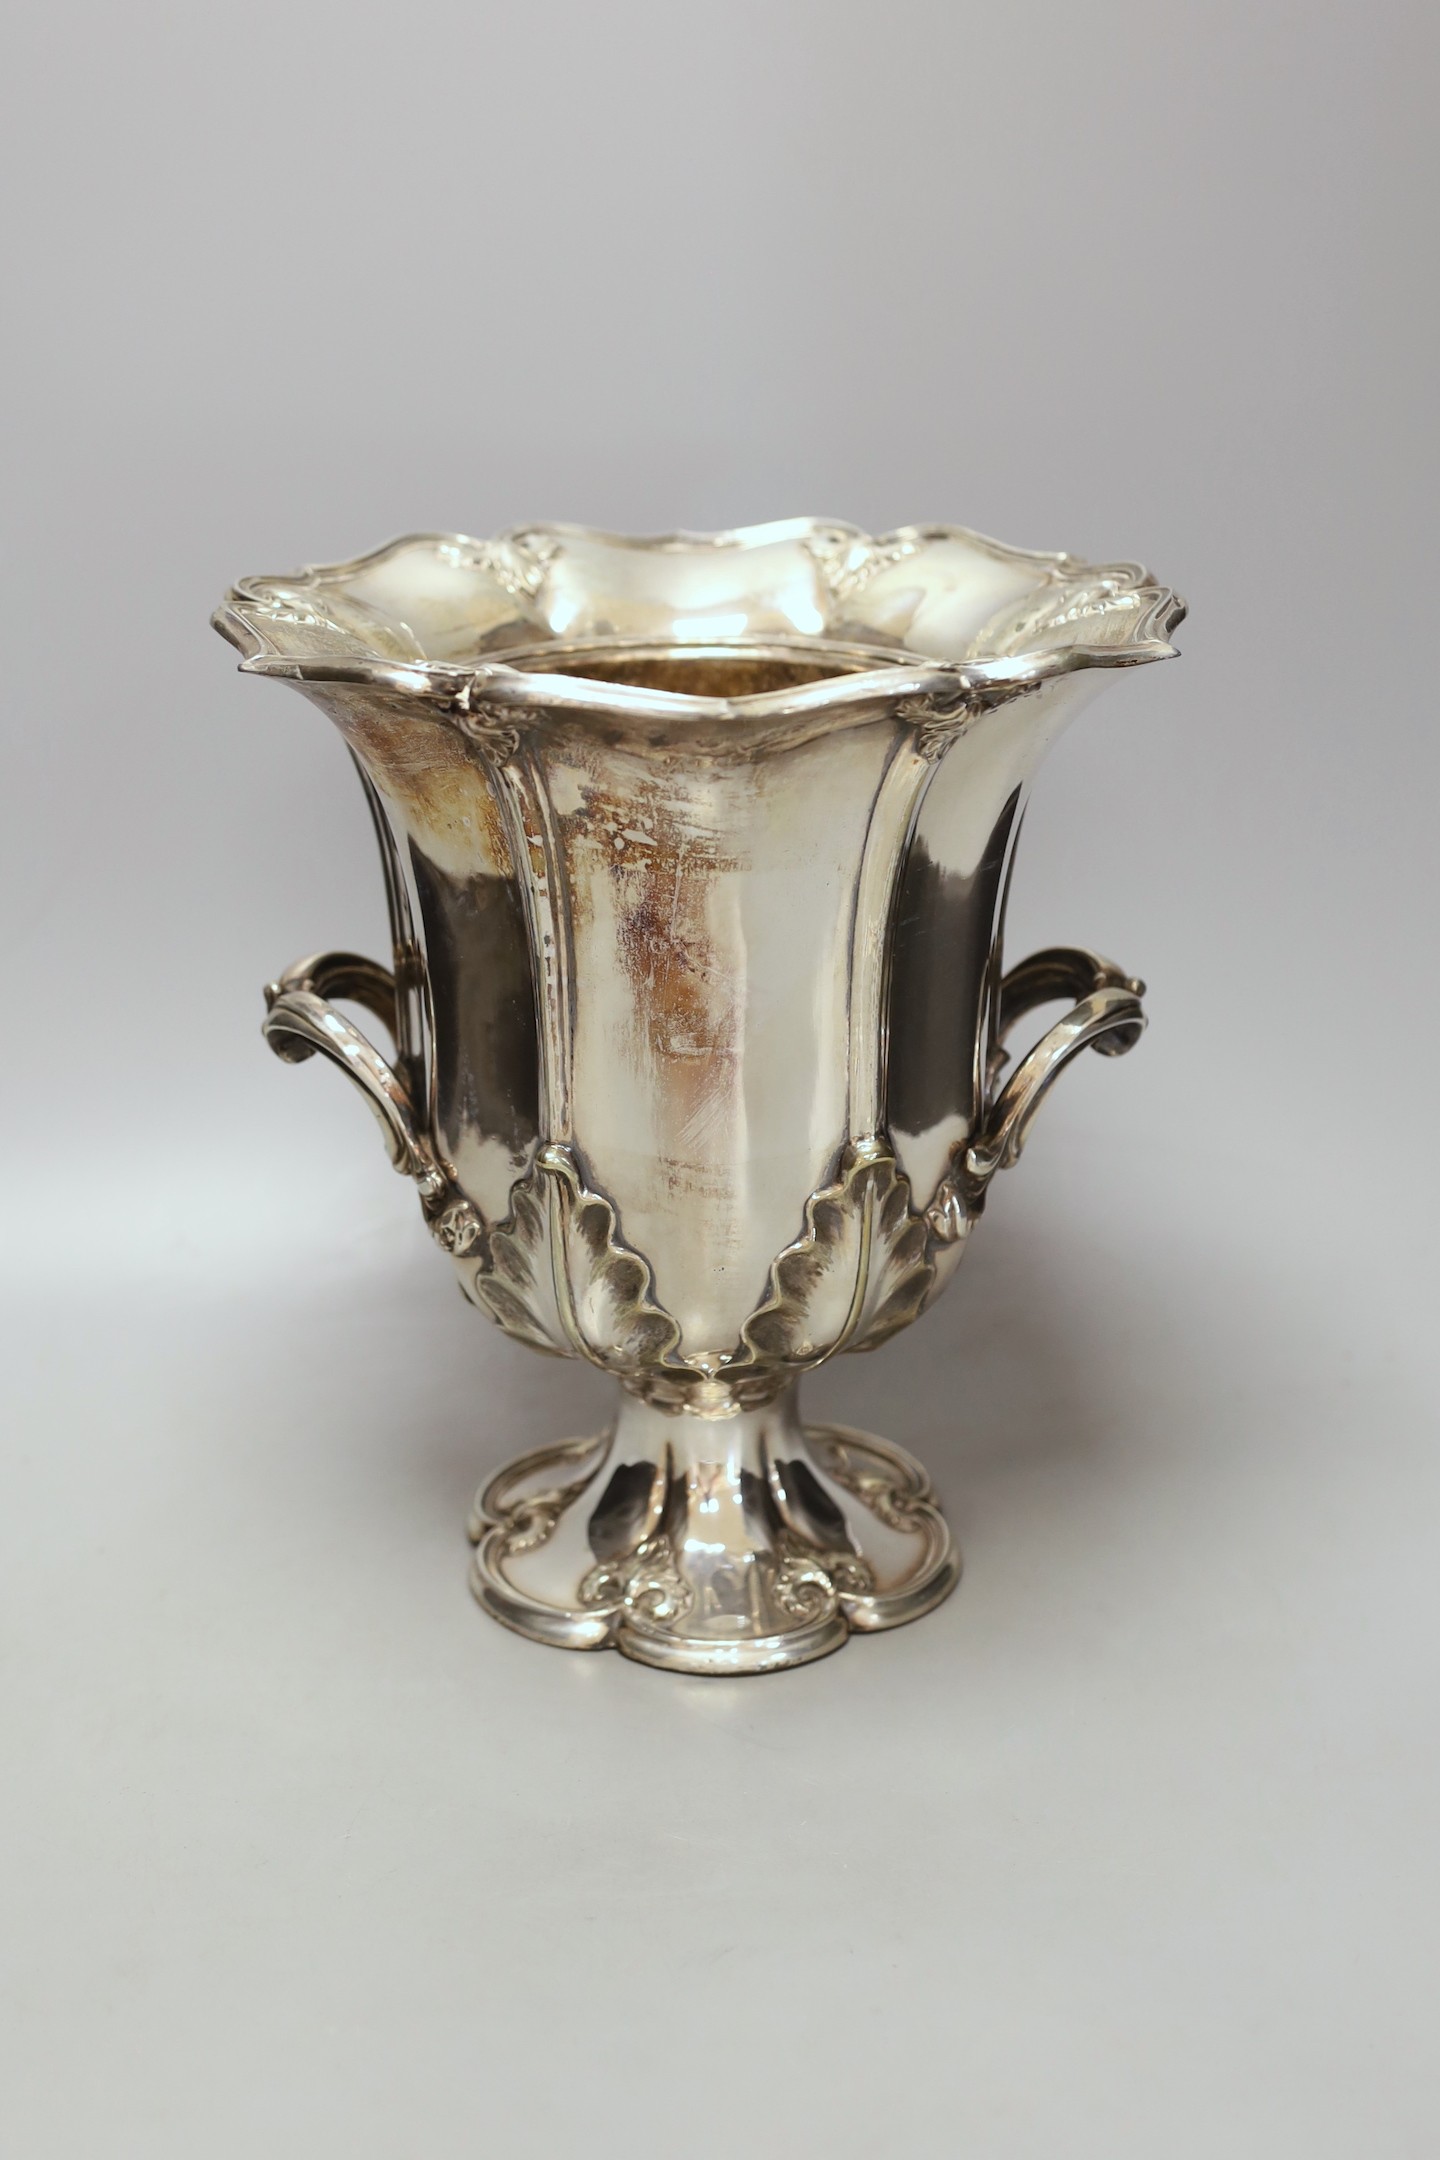 A Sheffield plate two handled wine cooler - 26.5cm tall